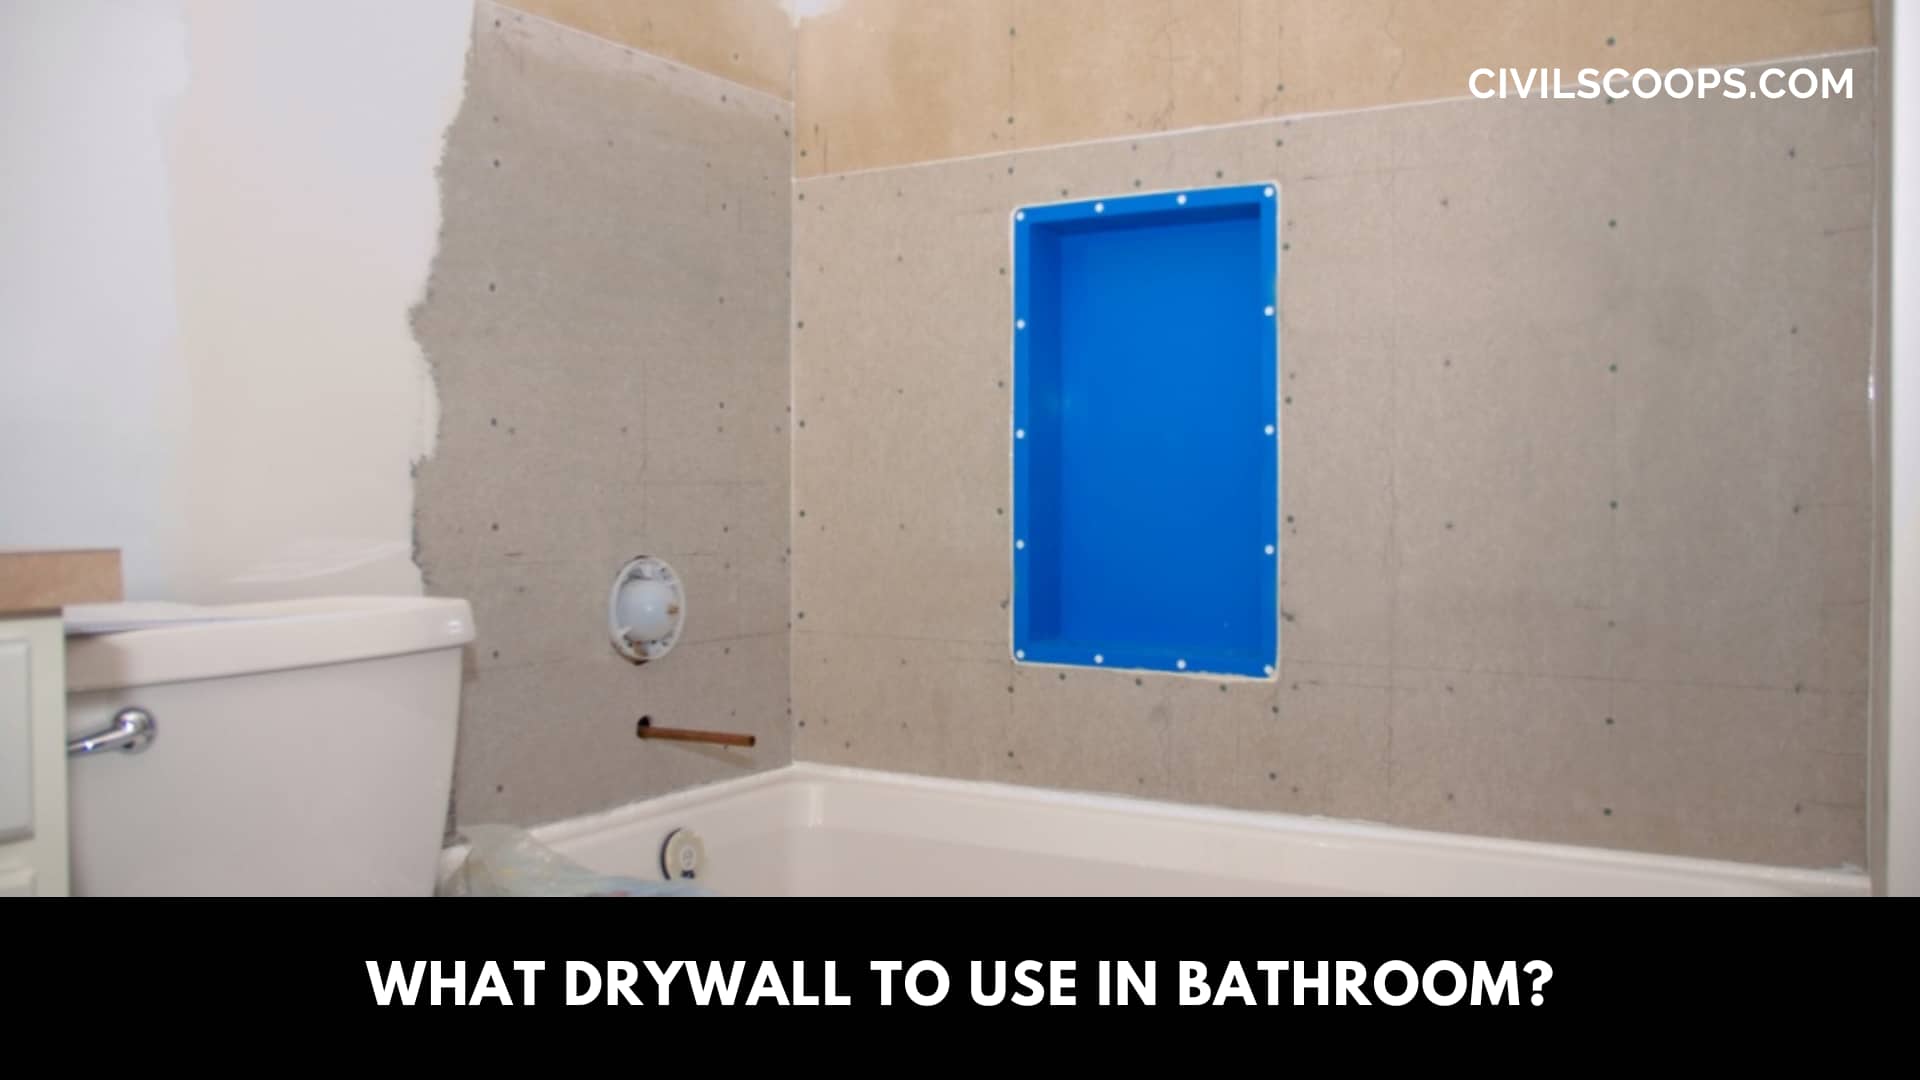 What Drywall to Use in Bathroom